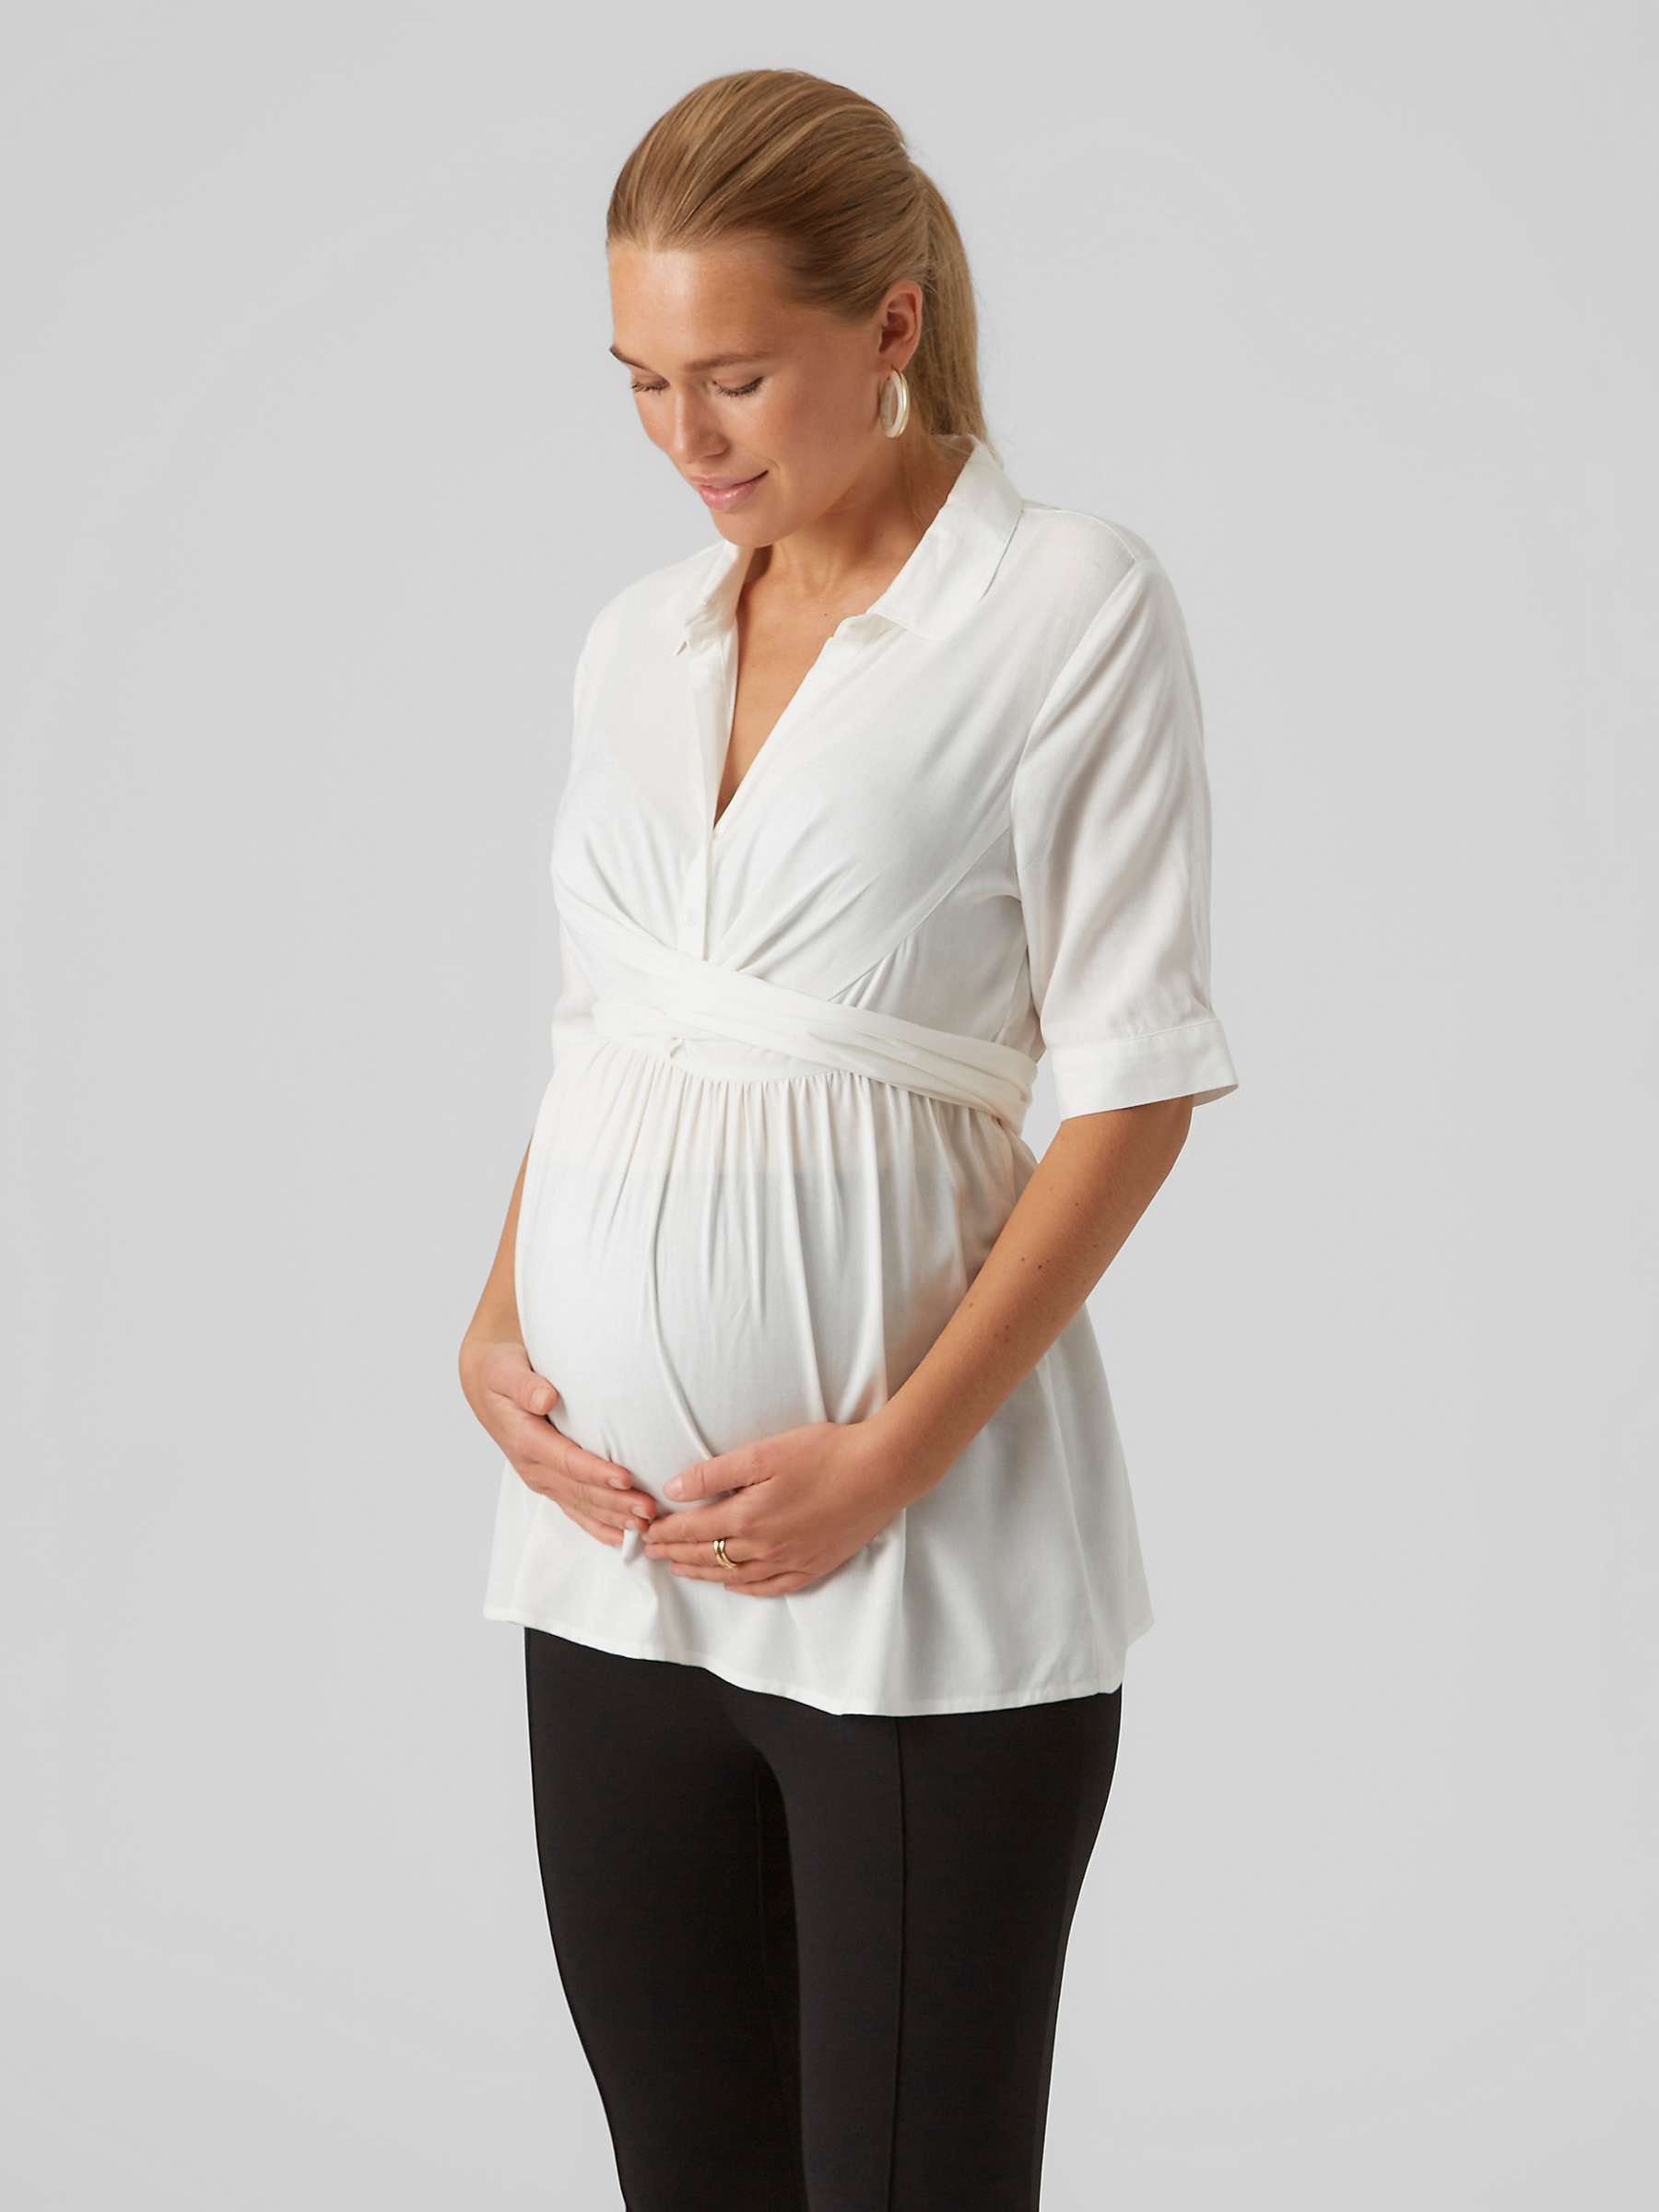 Buy Mamalicious Eline Belted Maternity & Nursing Top, Snow White Online at johnlewis.com